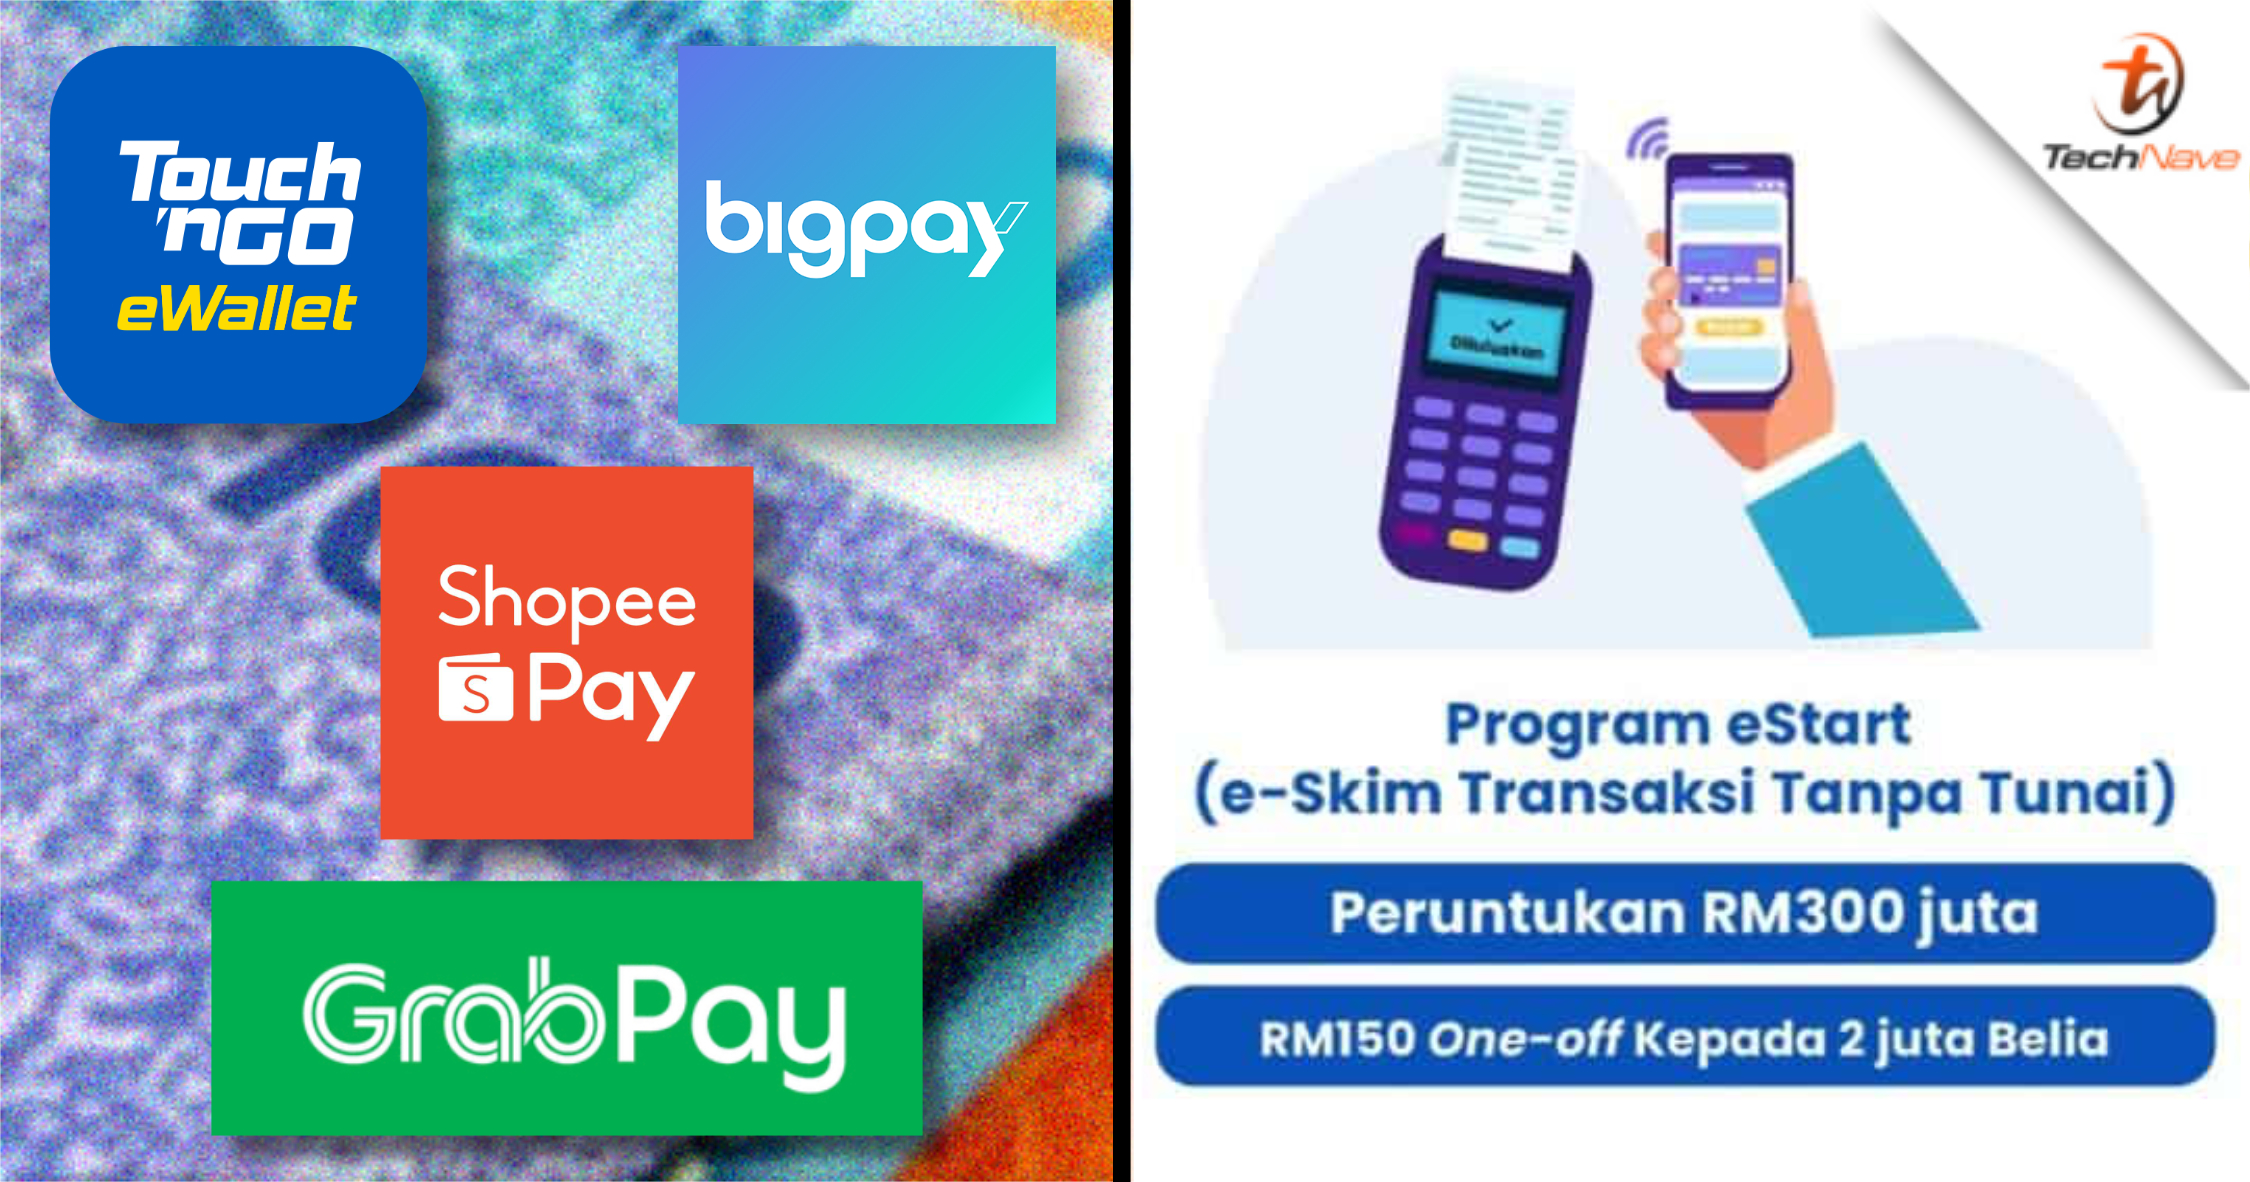 Malaysian youths can claim RM150 e-wallet credit via BigPay, GrabPay, ShopeePay and Touch ’n Go starting mid-April